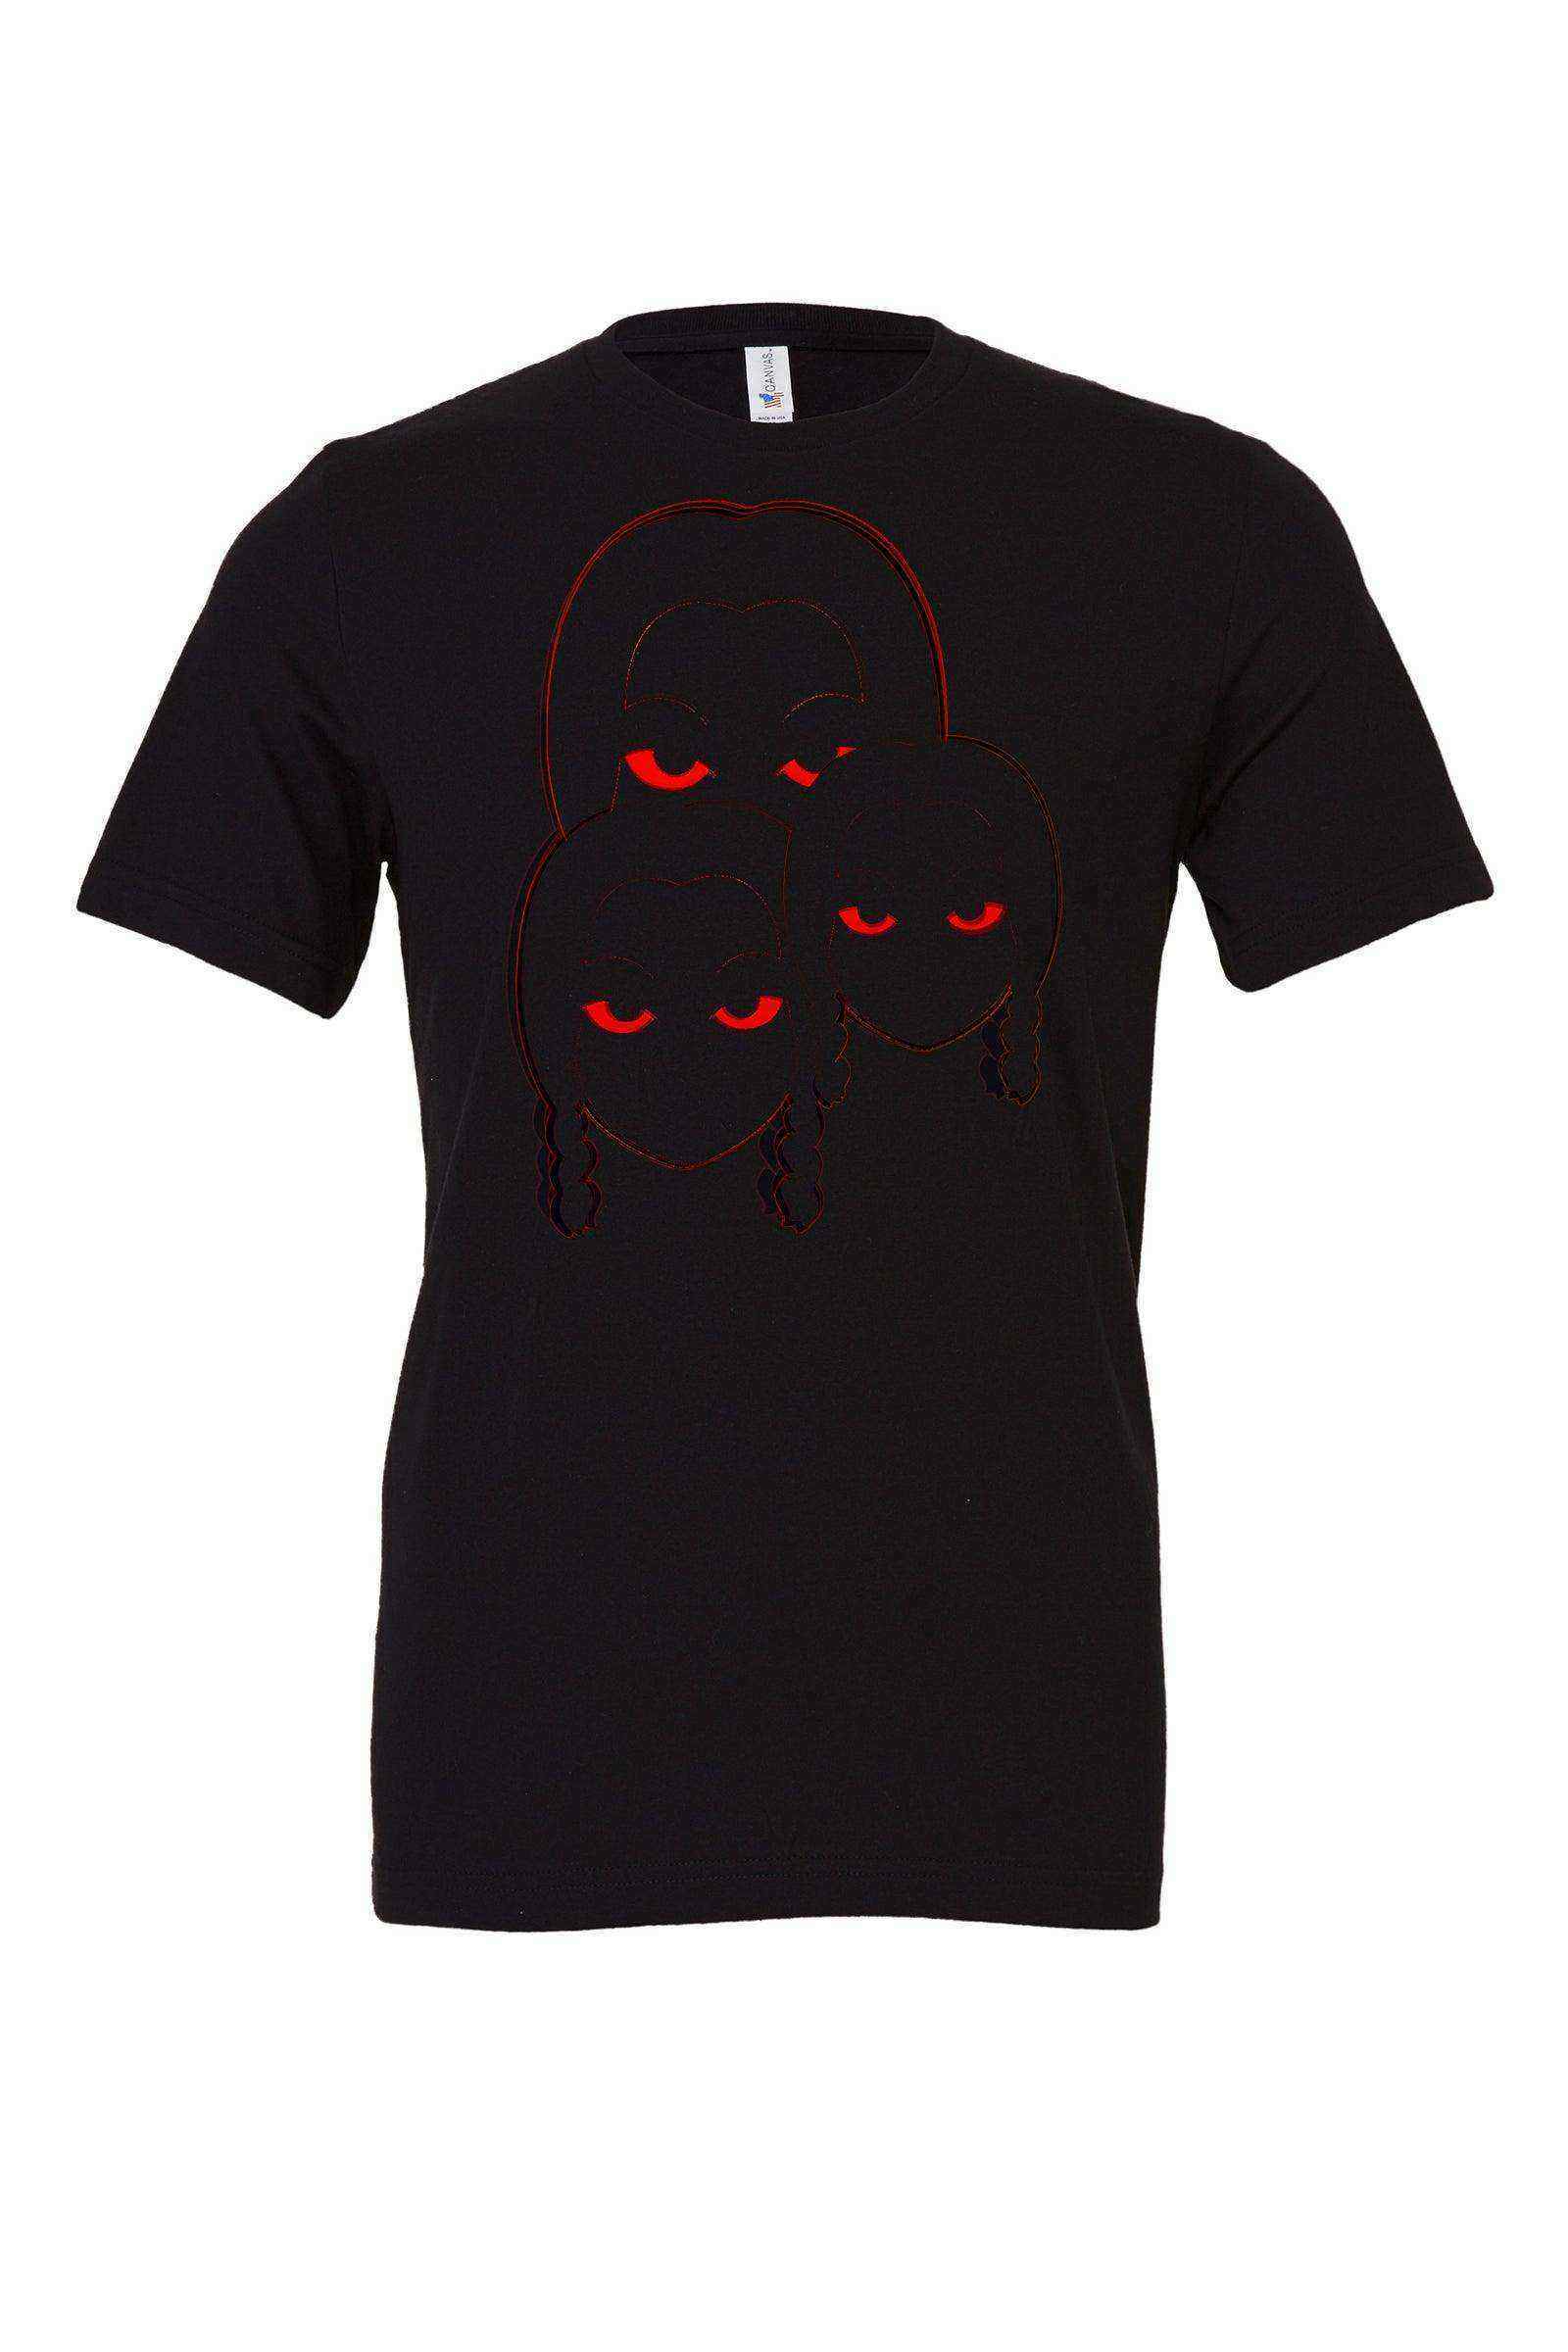 Creepy Wednesday Shirt | The Addams Shirt | Red Wednesday - Dylan's Tees